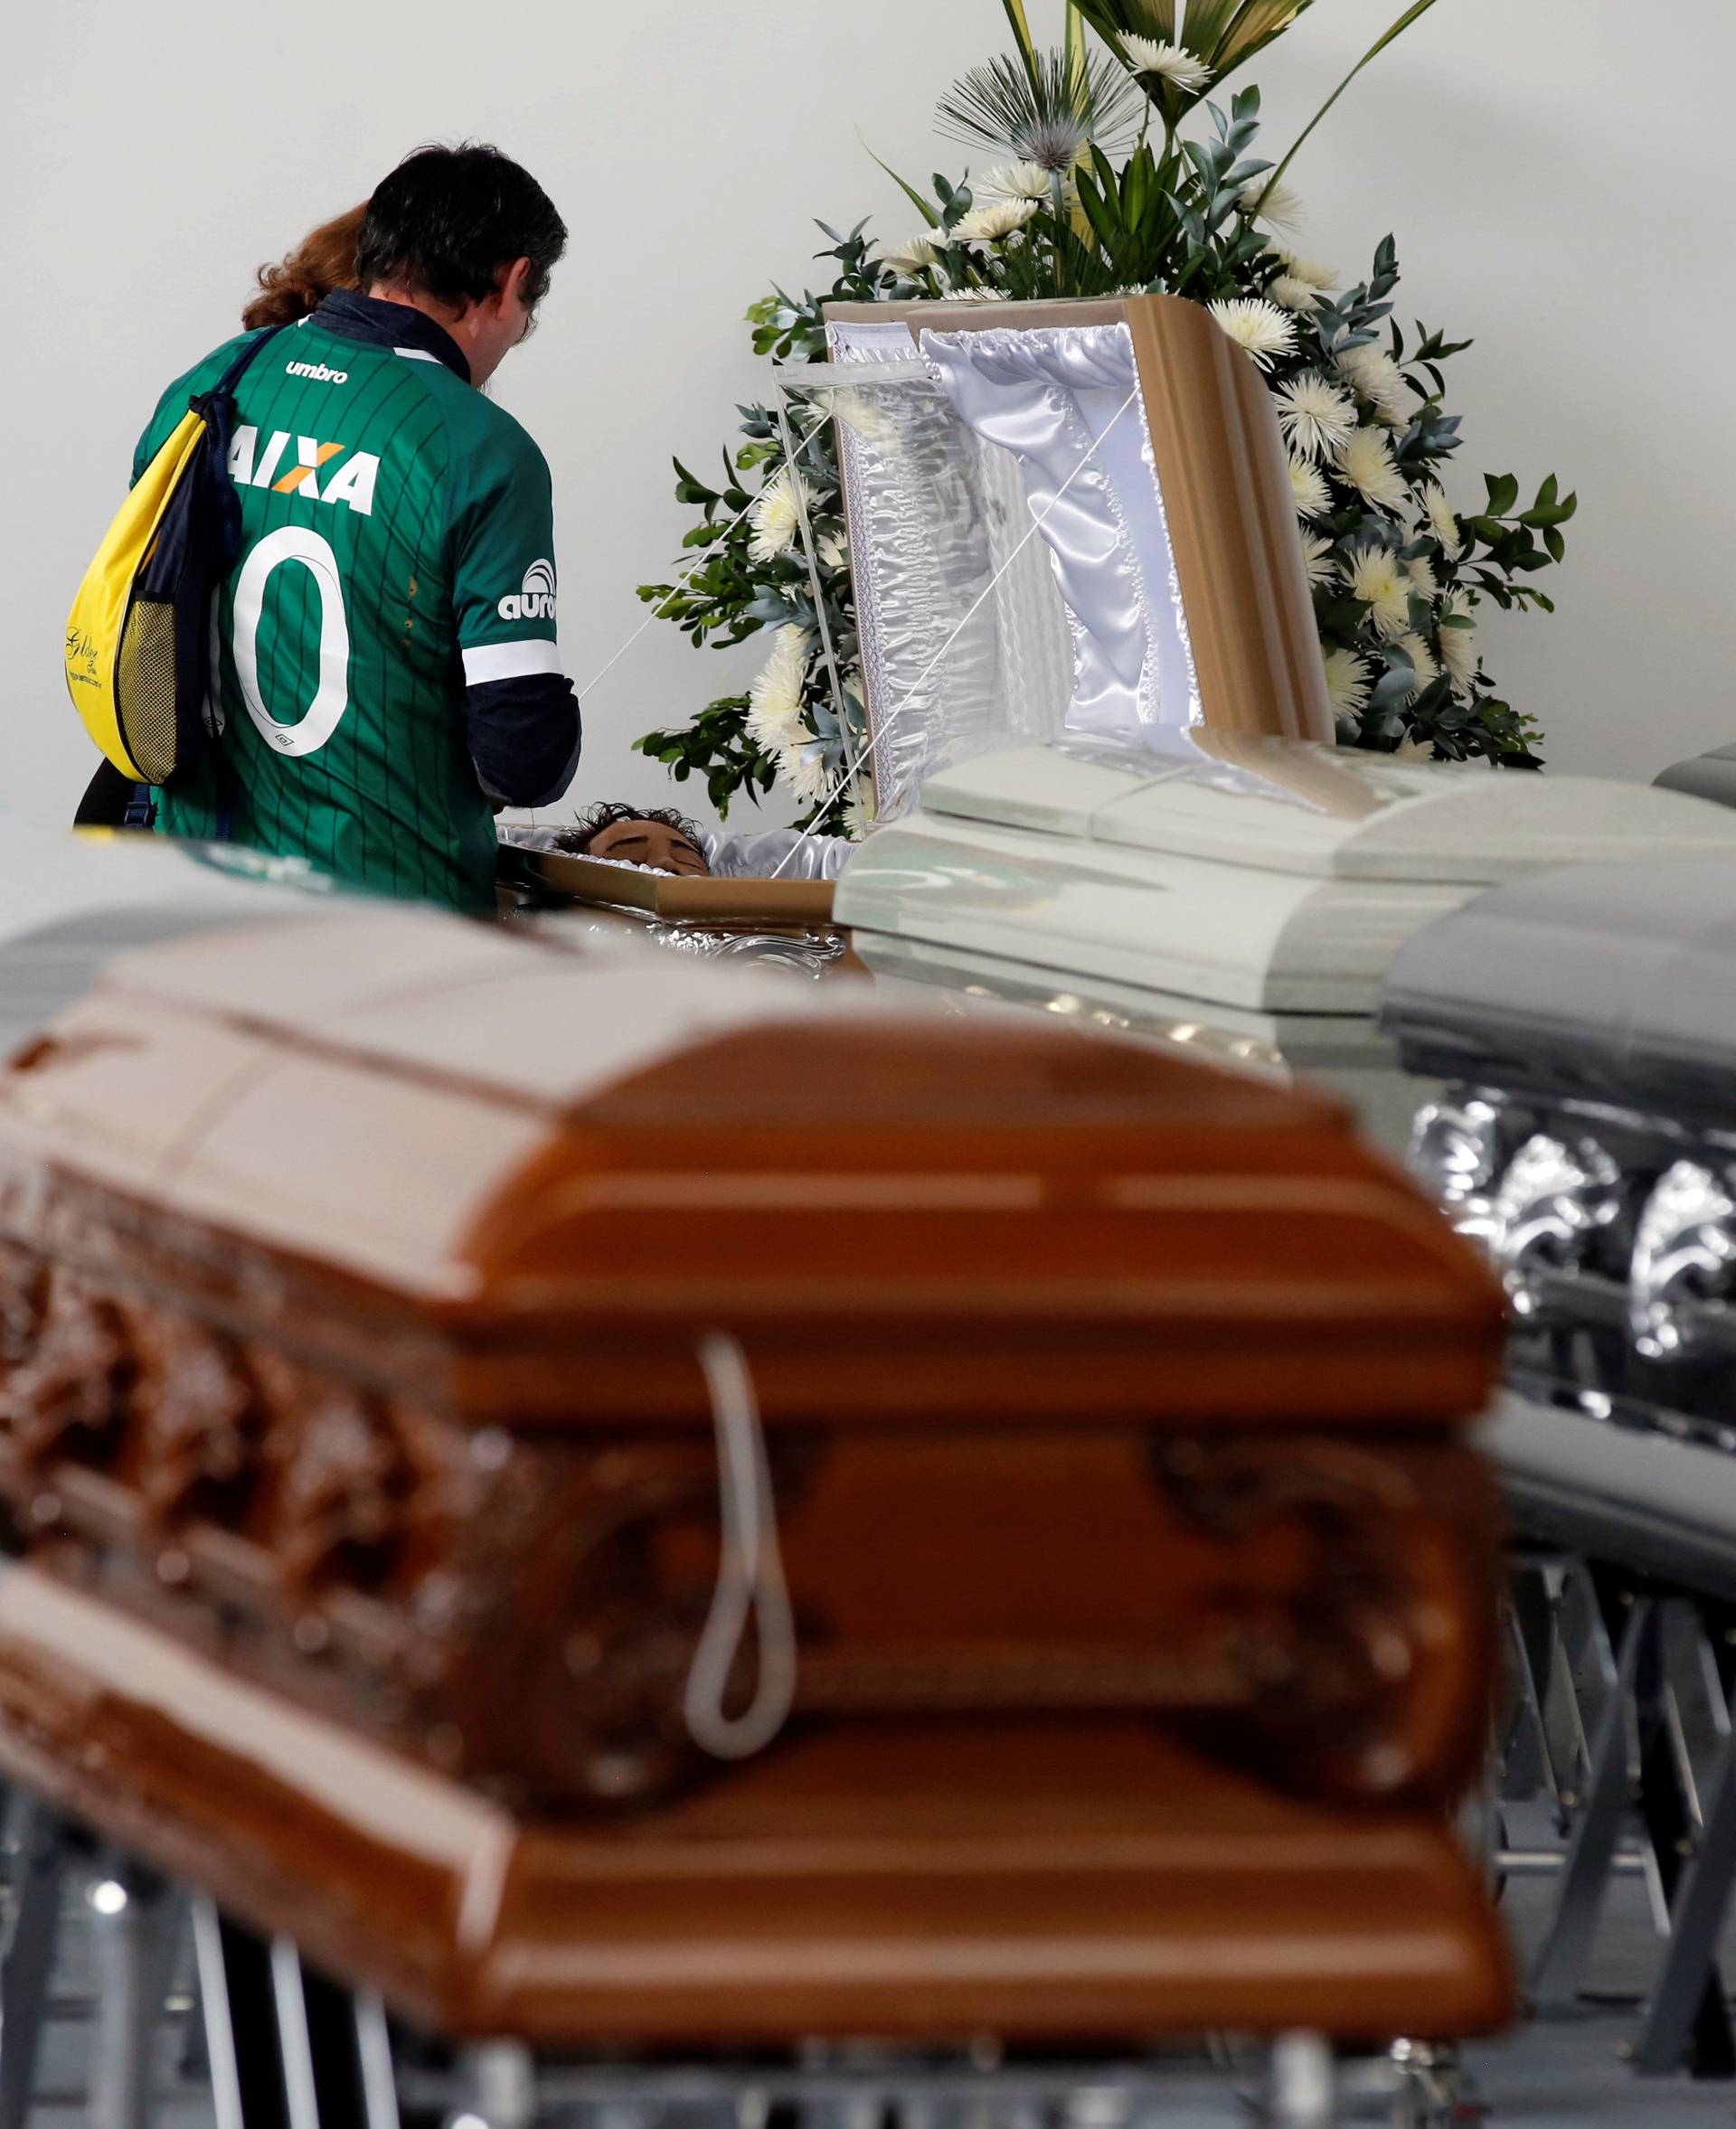 A relative looks into the coffin of Nilson Folle Junior, one of the soccer team's managers and who died along with others in an accident of the plane that crashed into the Colombian jungle with the Brazilian soccer team onboard, in Medellin